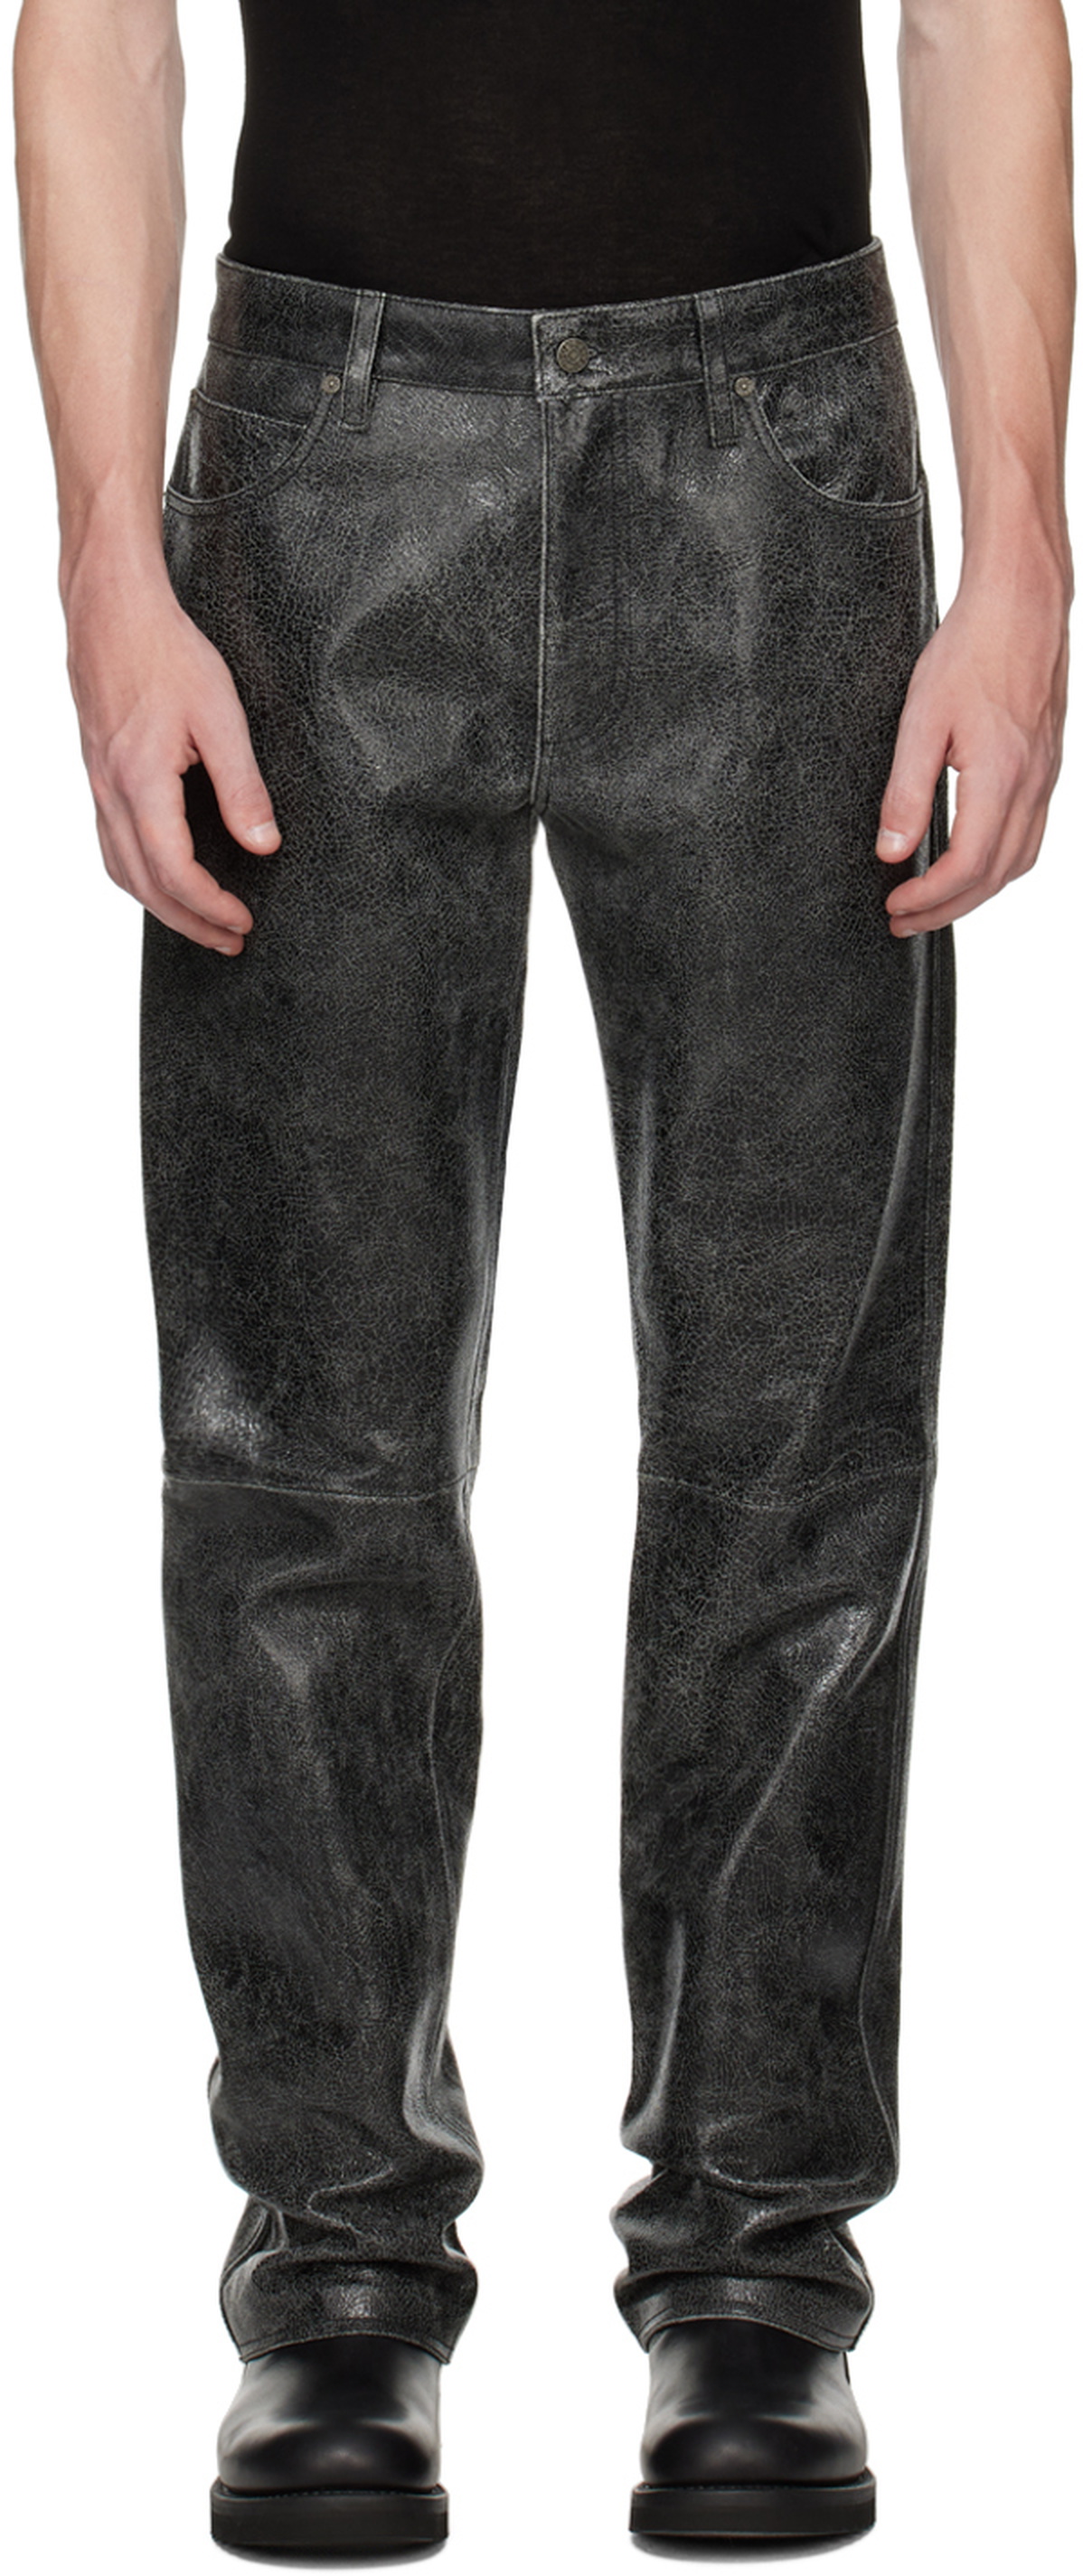 GUESS USA Black Cracked Leather Pants GUESS